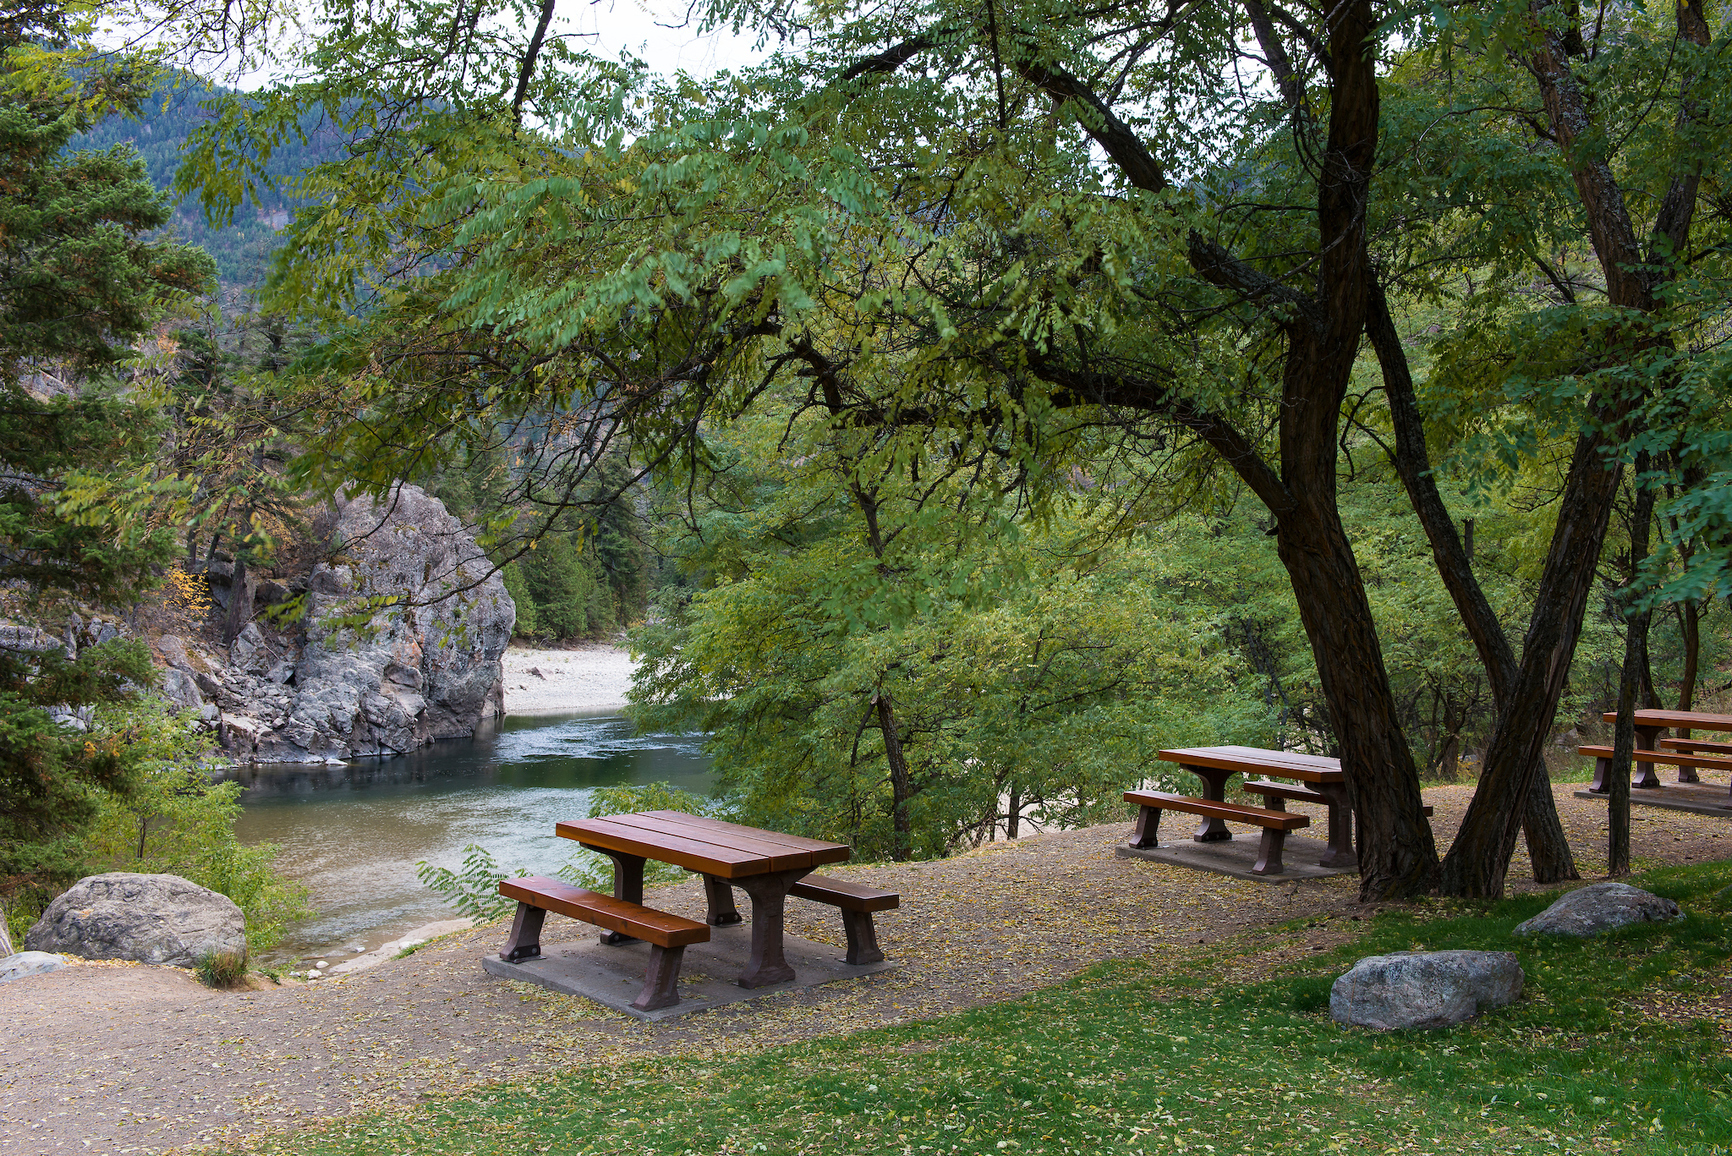 Day use picnic tables set up along the rivers edge underneath tree cover